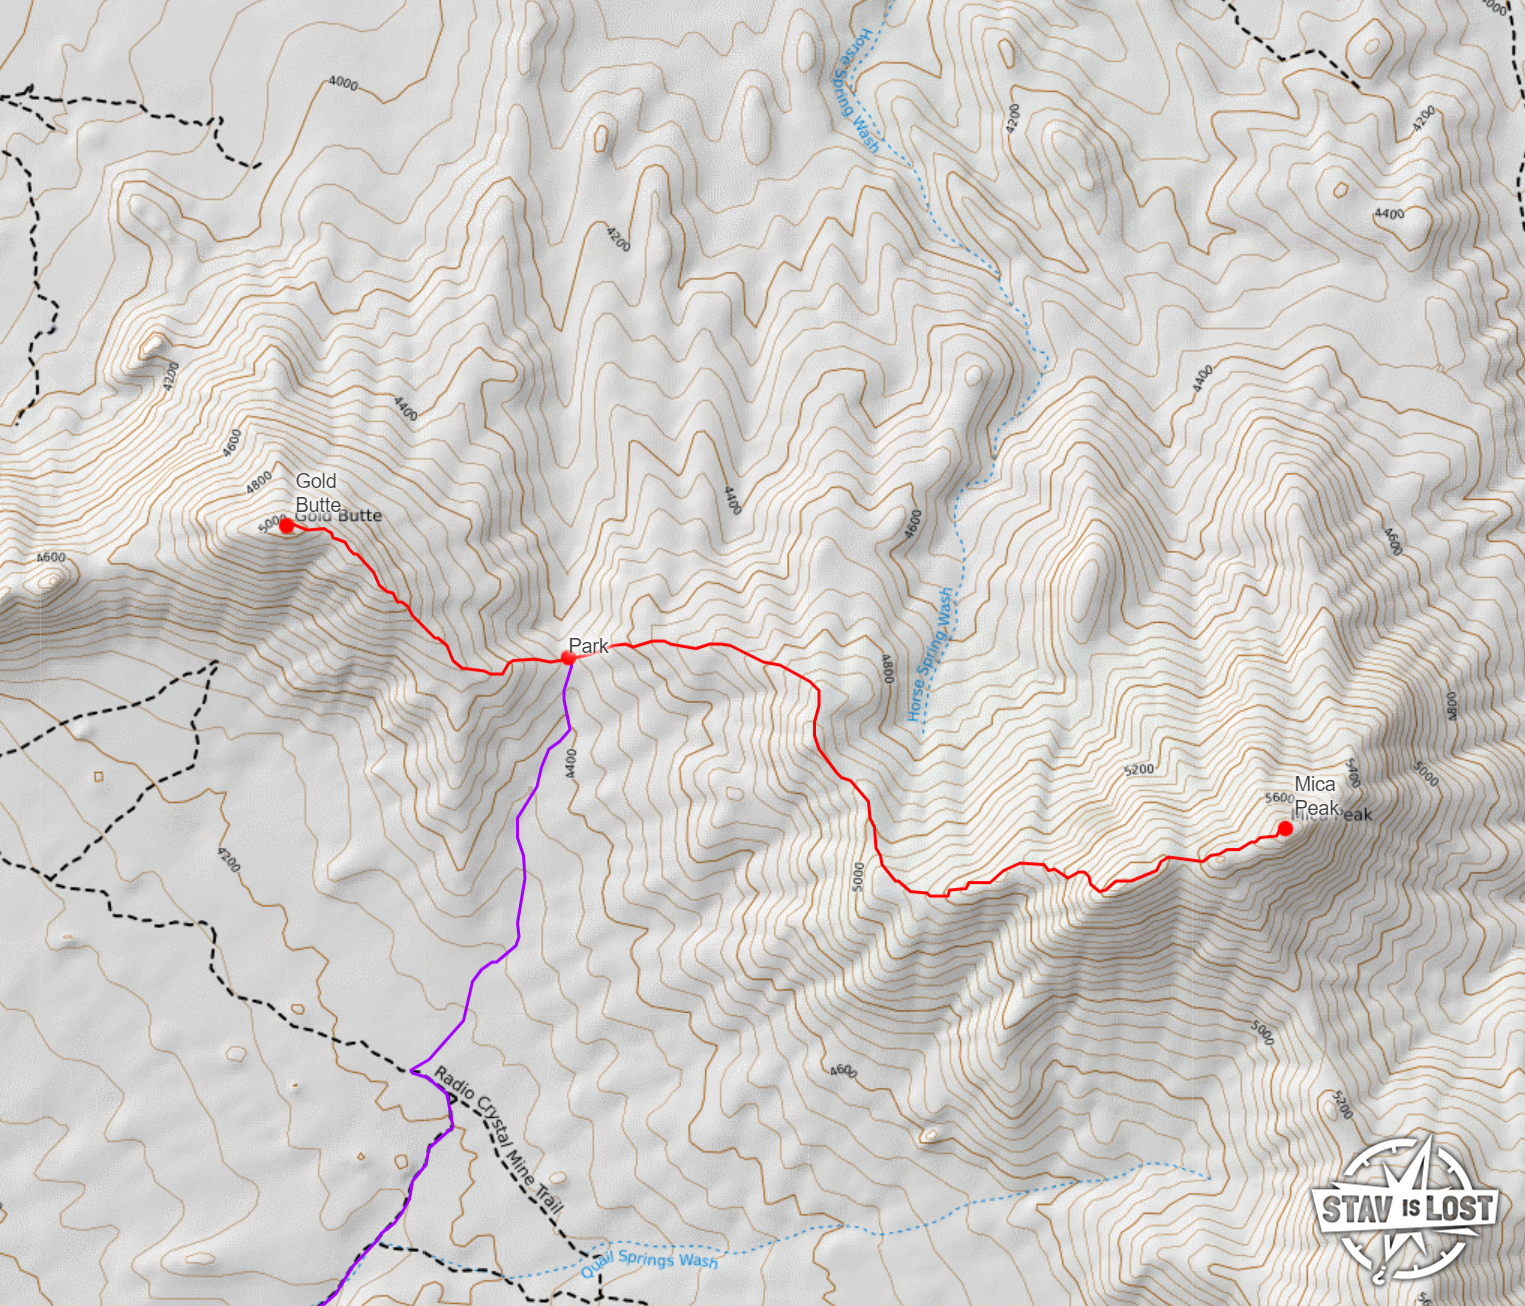 map for Mica Peak and Gold Butte by stav is lost